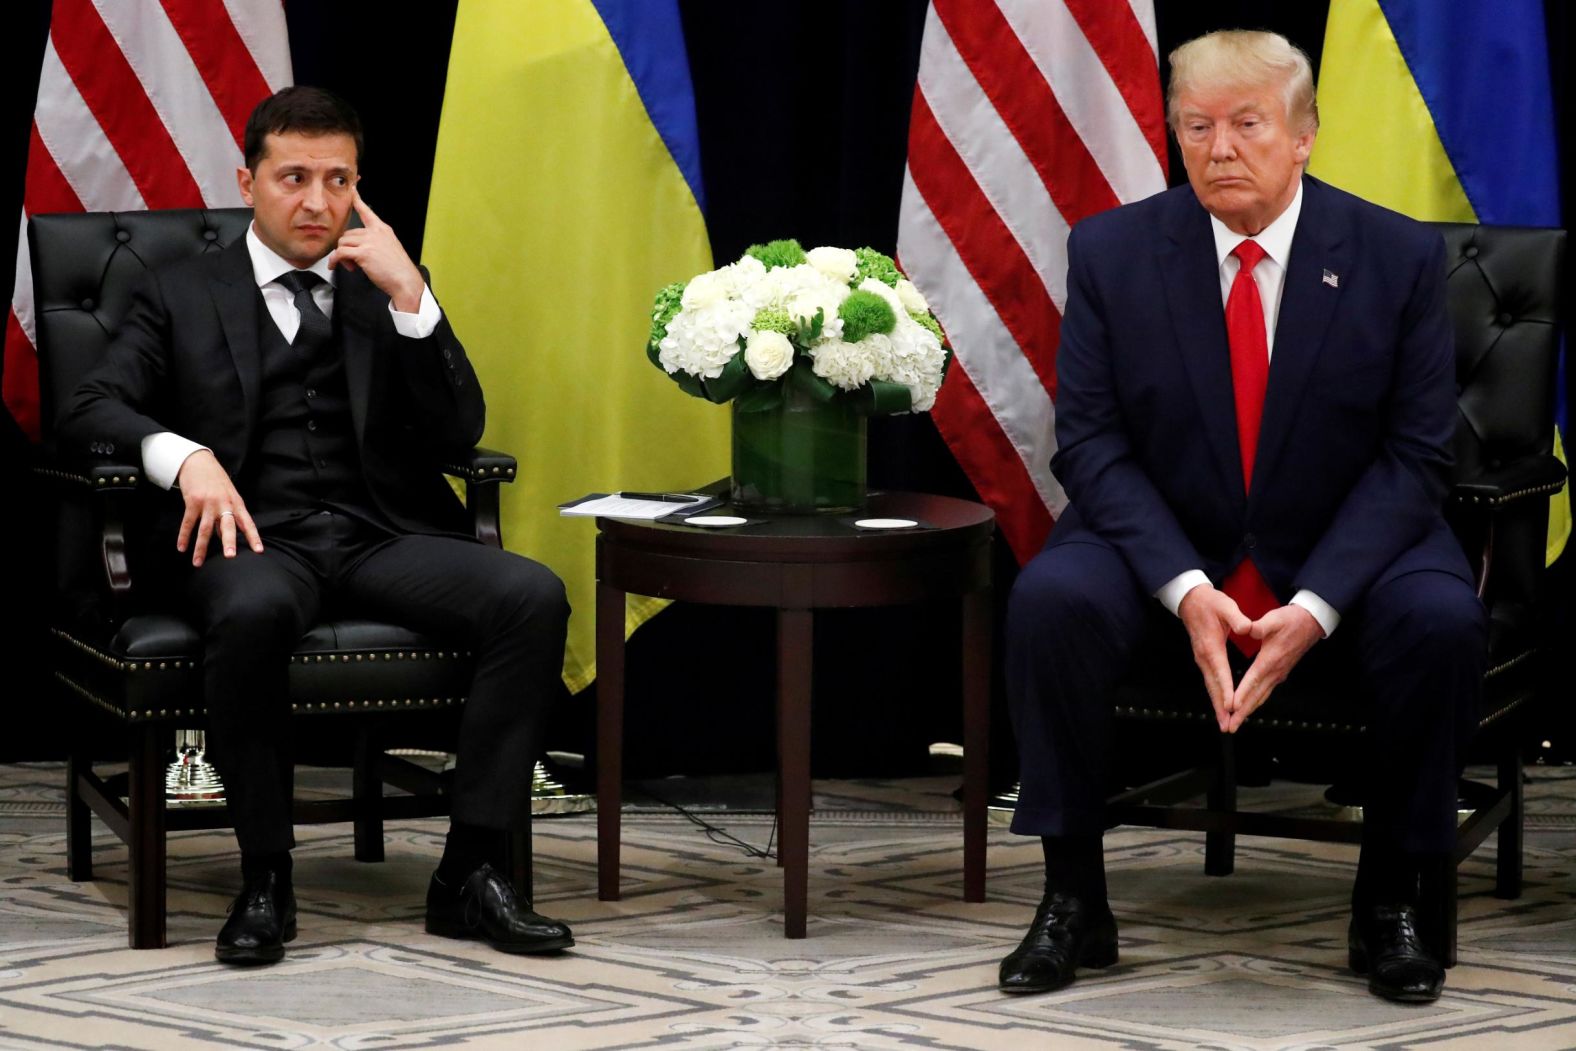 Ukrainian President Volodymyr Zelensky meets with Trump on the sidelines of the UN General Assembly in September 2019. A day earlier, the White House <a href="index.php?page=&url=https%3A%2F%2Fwww.cnn.com%2F2019%2F09%2F25%2Fpolitics%2Fdonald-trump-ukraine-transcript%2Findex.html" target="_blank">released a transcript of a conversation</a> that Trump had in July with Zelensky. According to the transcript, Trump repeatedly pushed for Zelensky to investigate Joe Biden, a former vice president and potential 2020 political rival. There is no evidence of wrongdoing by Biden. House Speaker Nancy Pelosi announced that she would be<a href="index.php?page=&url=http%3A%2F%2Fwww.cnn.com%2F2019%2F10%2F03%2Fpolitics%2Fgallery%2Ftrump-impeachment-inquiry%2Findex.html" target="_blank"> opening a formal impeachment inquiry on Trump. </a>Trump has insisted he did nothing wrong in his phone call with Zelensky, saying there was "no pressure whatsoever." The House <a href="index.php?page=&url=https%3A%2F%2Fwww.cnn.com%2F2019%2F12%2F18%2Fpolitics%2Fhouse-impeachment-vote%2Findex.html" target="_blank">impeached him</a> in December, and the Senate <a href="index.php?page=&url=http%3A%2F%2Fwww.cnn.com%2F2020%2F02%2F05%2Fpolitics%2Fsenate-impeachment-trial-vote-acquittal%2Findex.html" target="_blank">acquitted him</a> in February.